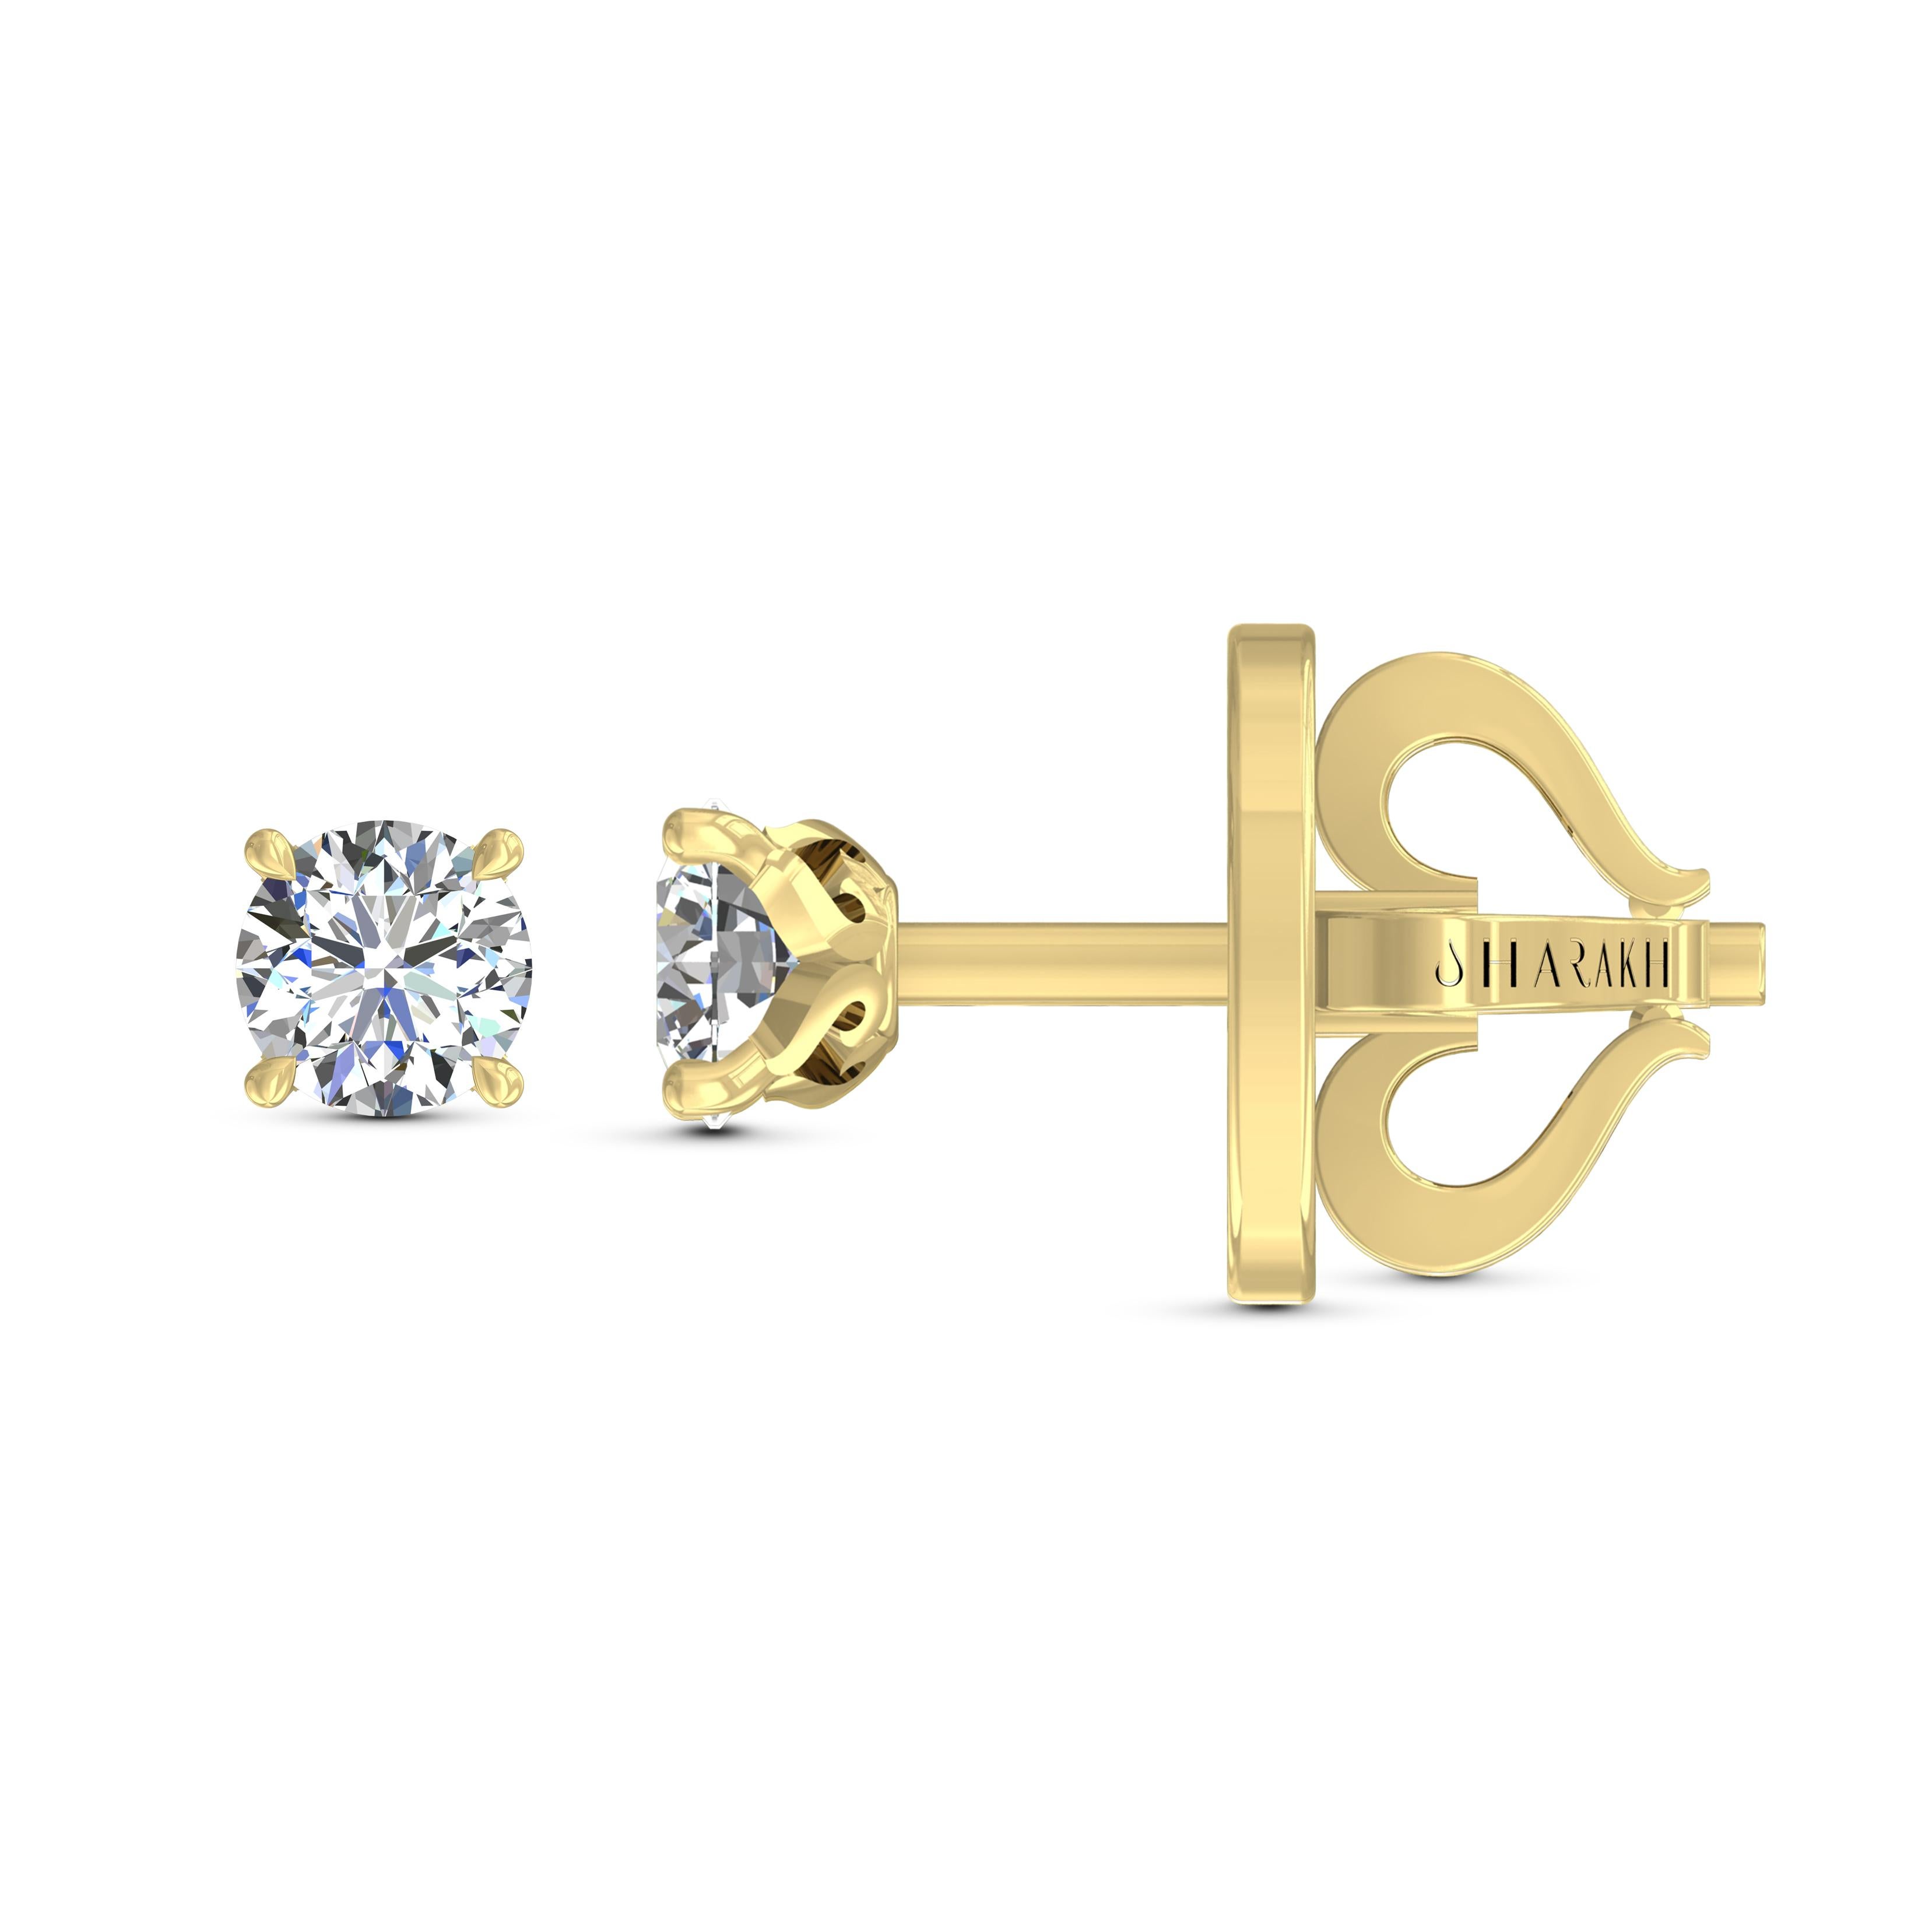 Contemporary Harakh GIA Certified 0.54 Carat D Color VS1 Clarity 18 KT Diamond Stud Earrings For Sale